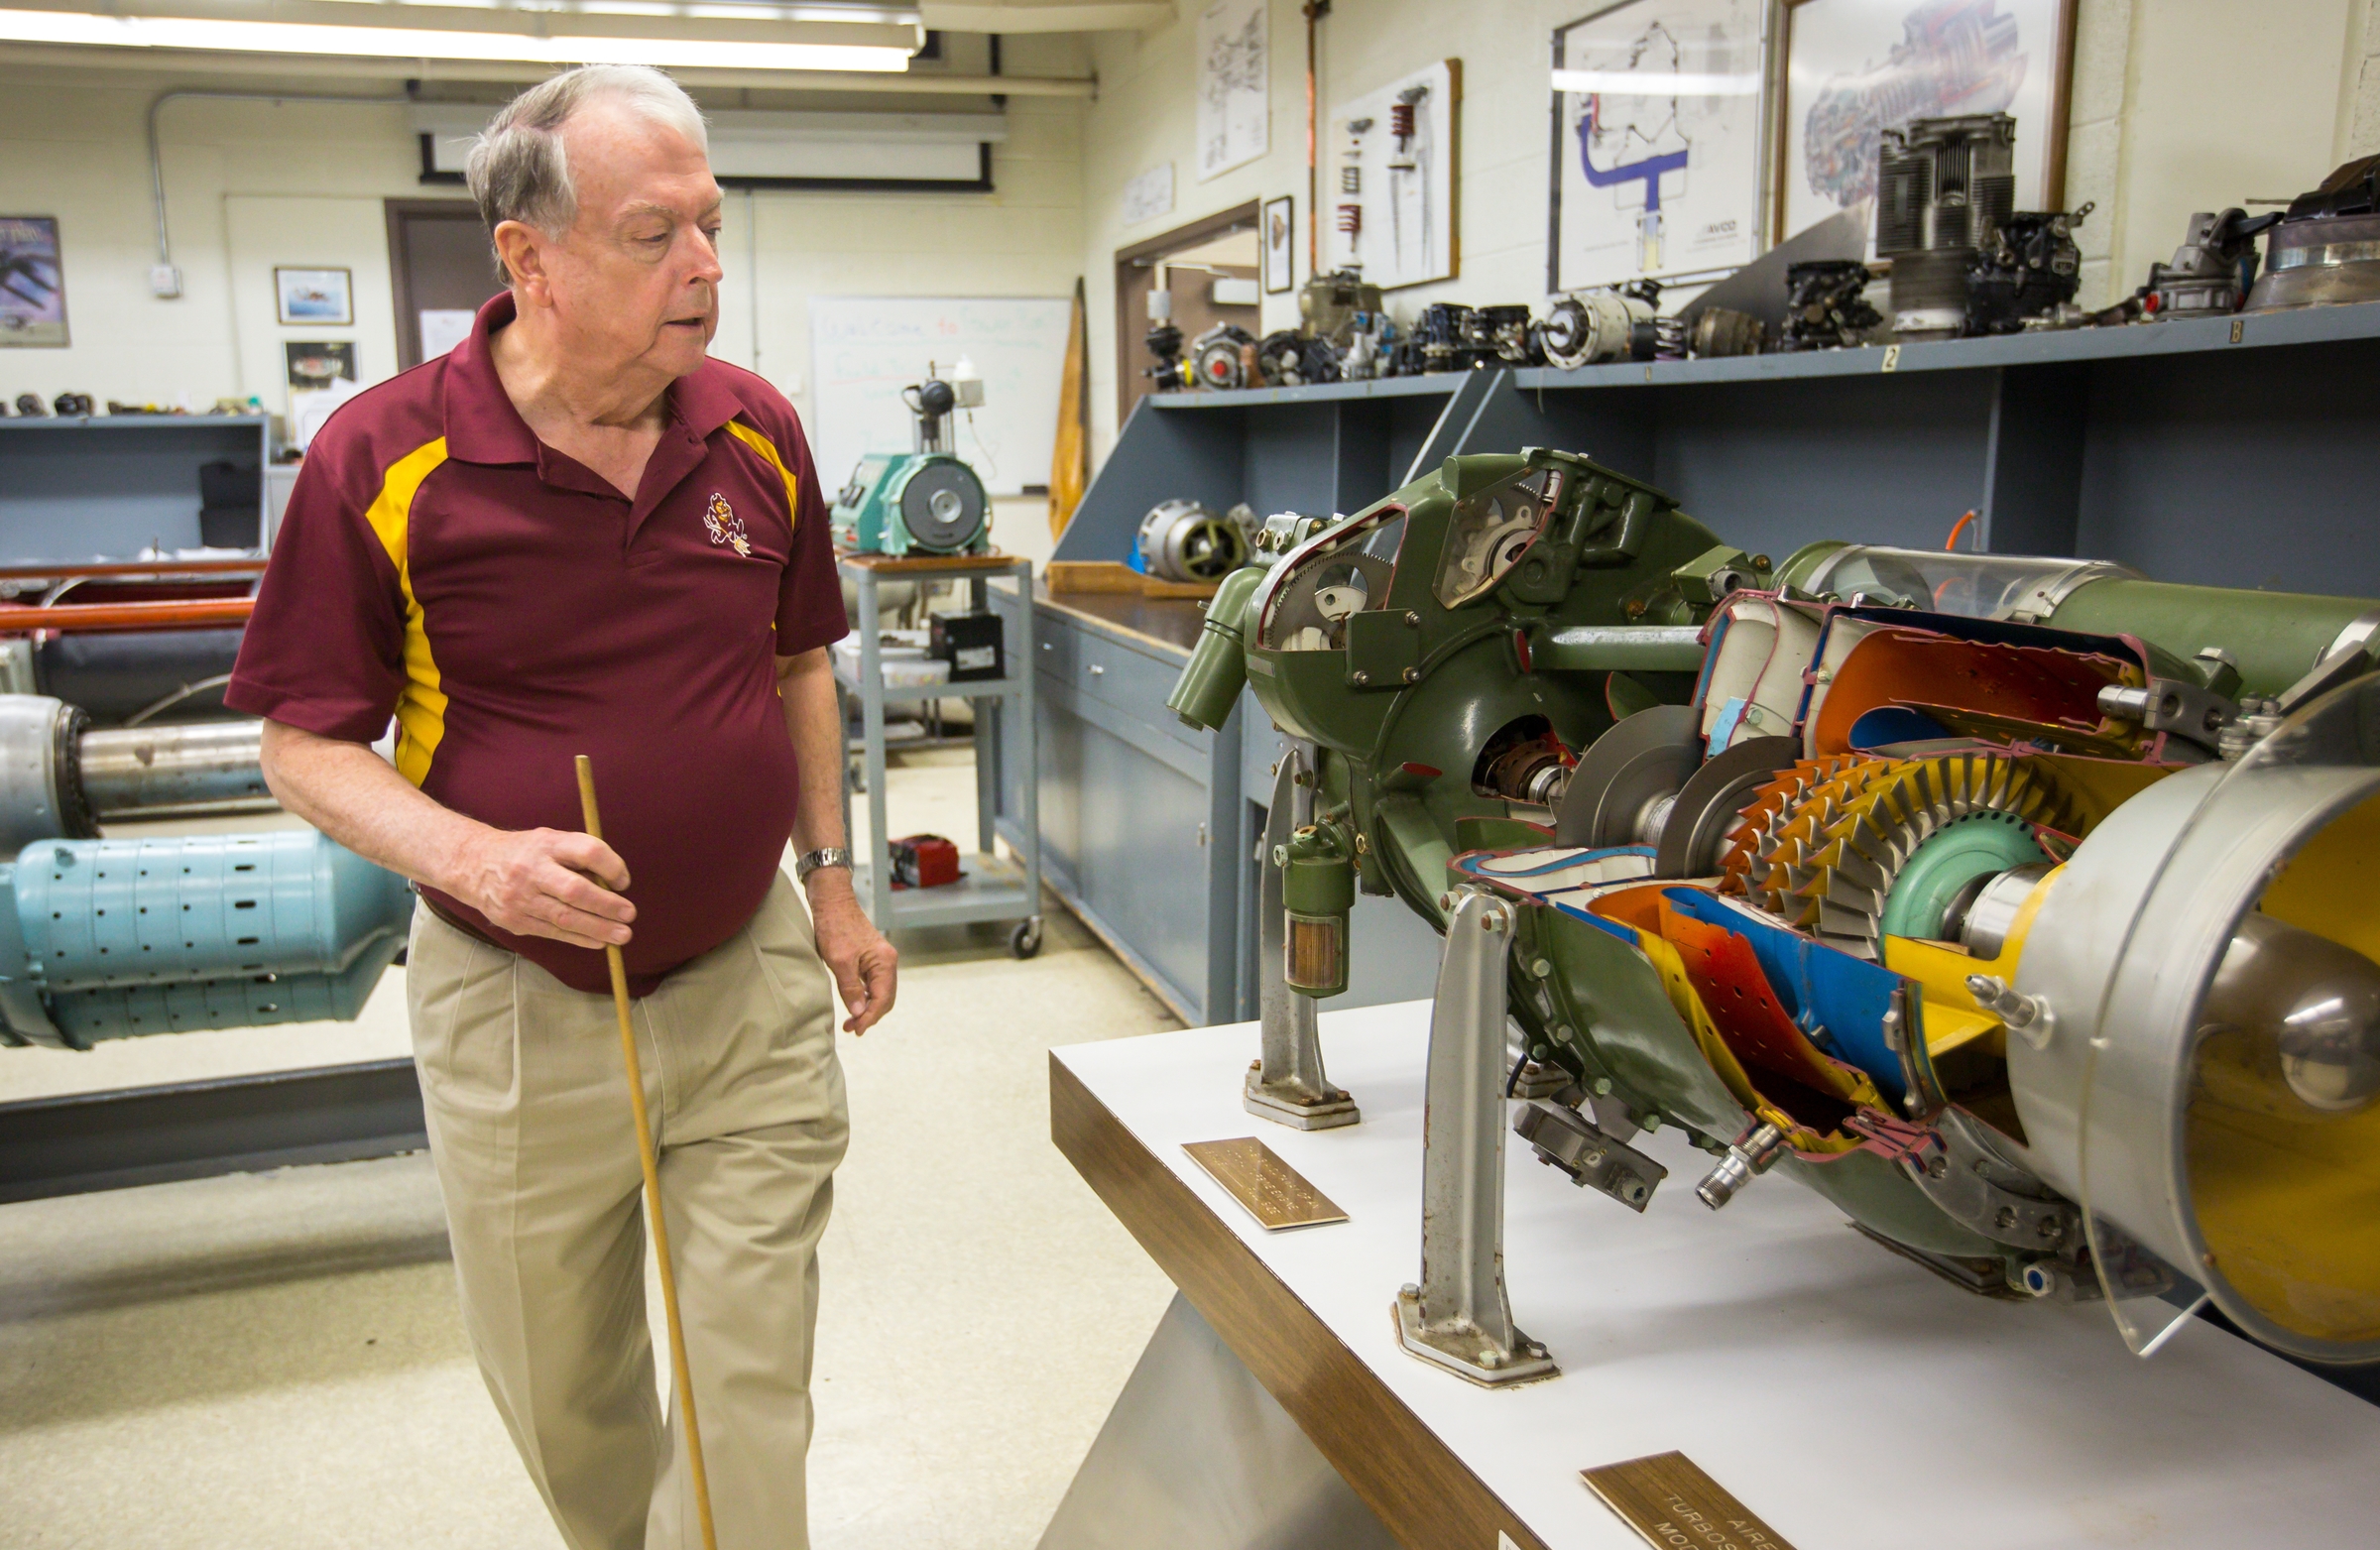 Aviation instructor Jimmy Kimberly walks in a lab.